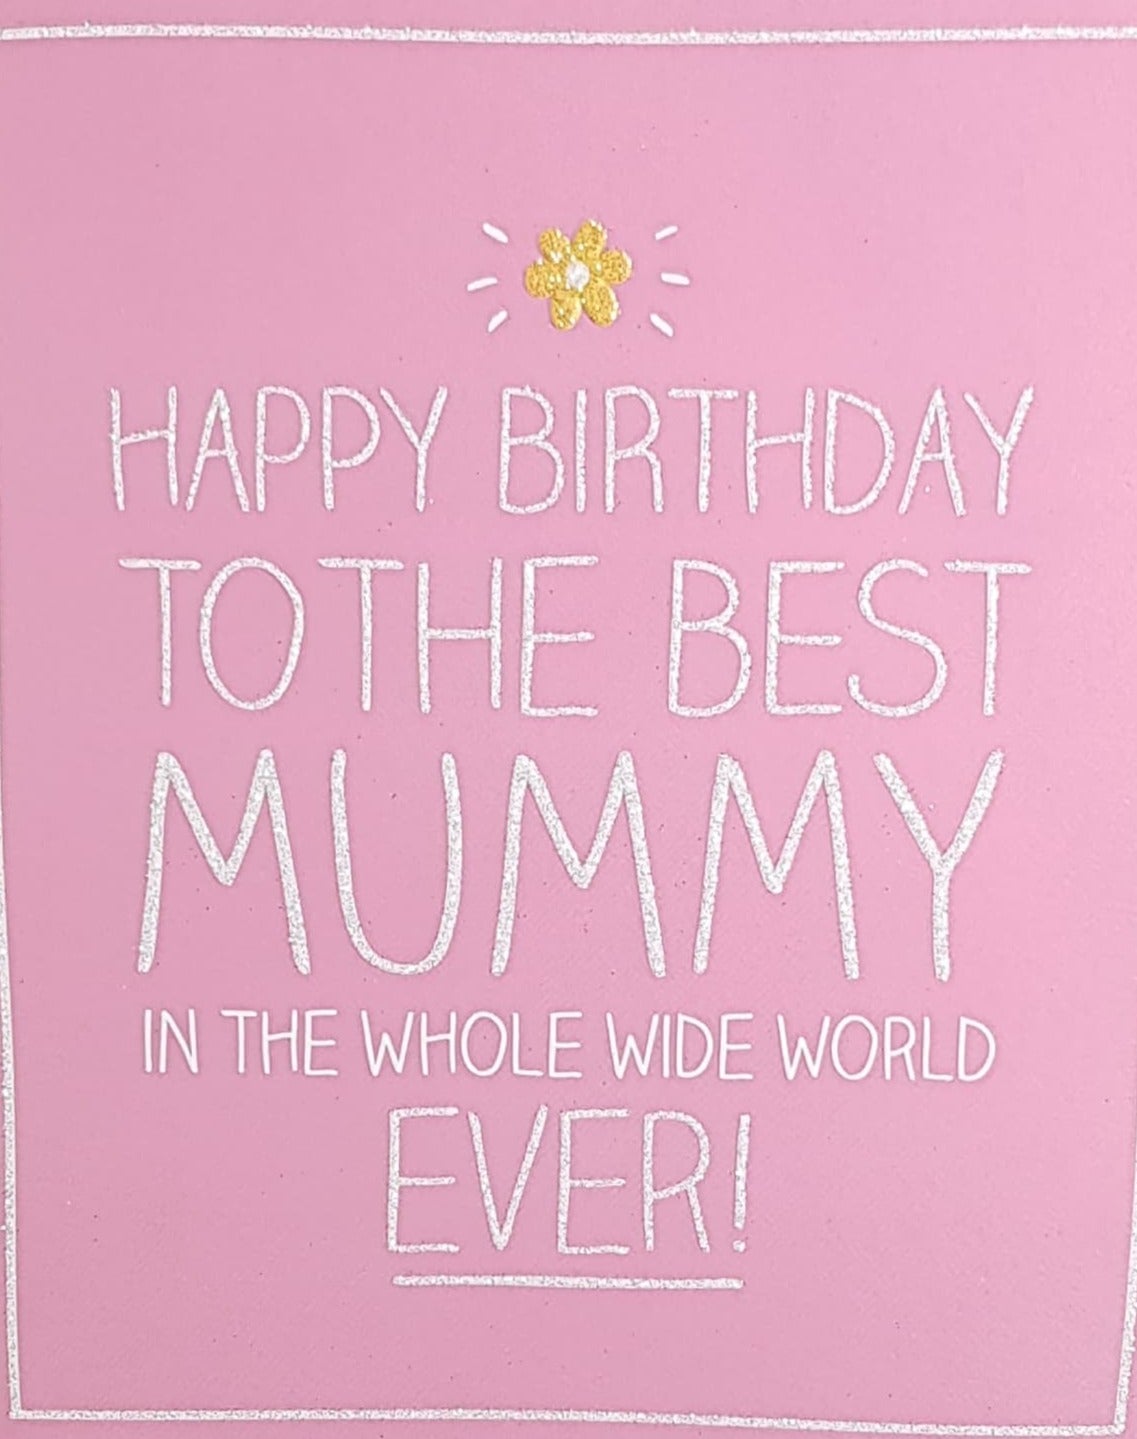 Birthday Card - Mummy / A Little Yellow Flower On A Pink Background